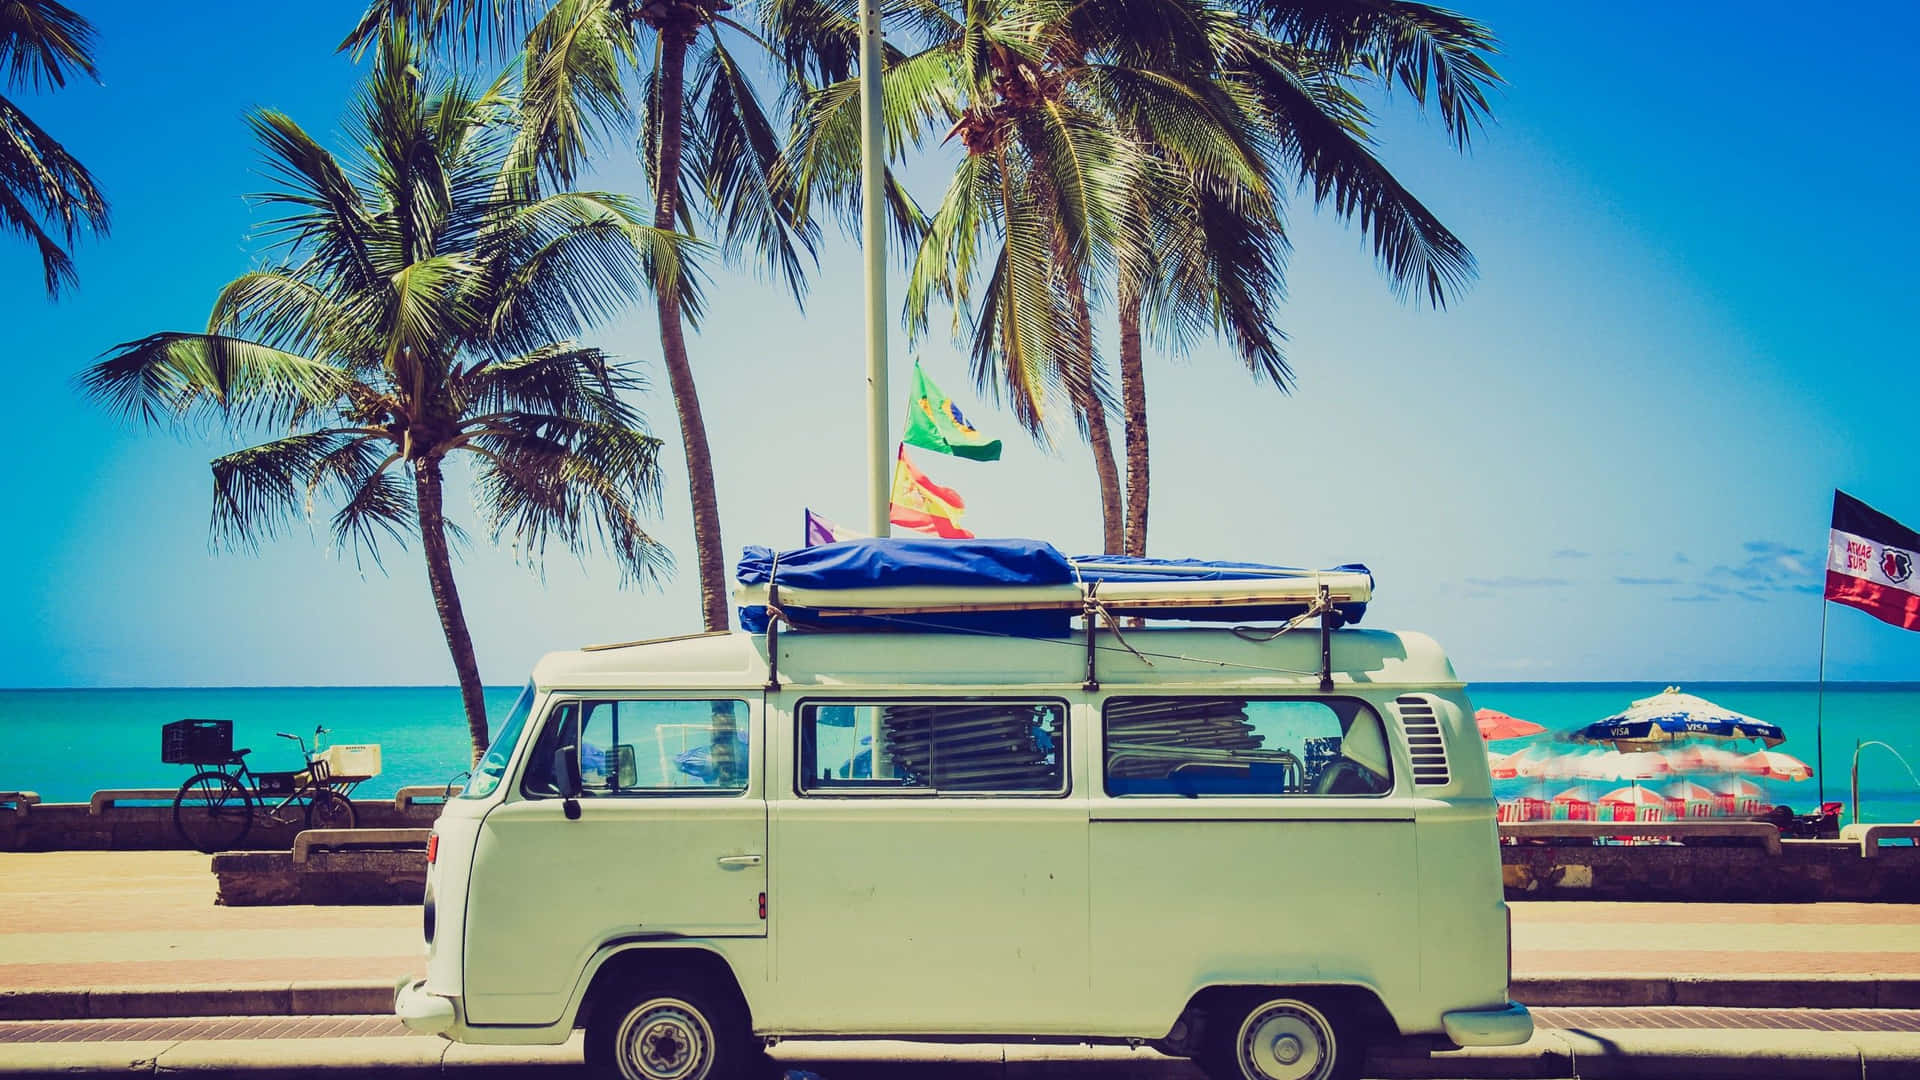 A Vw Bus Parked On The Beach With Palm Trees